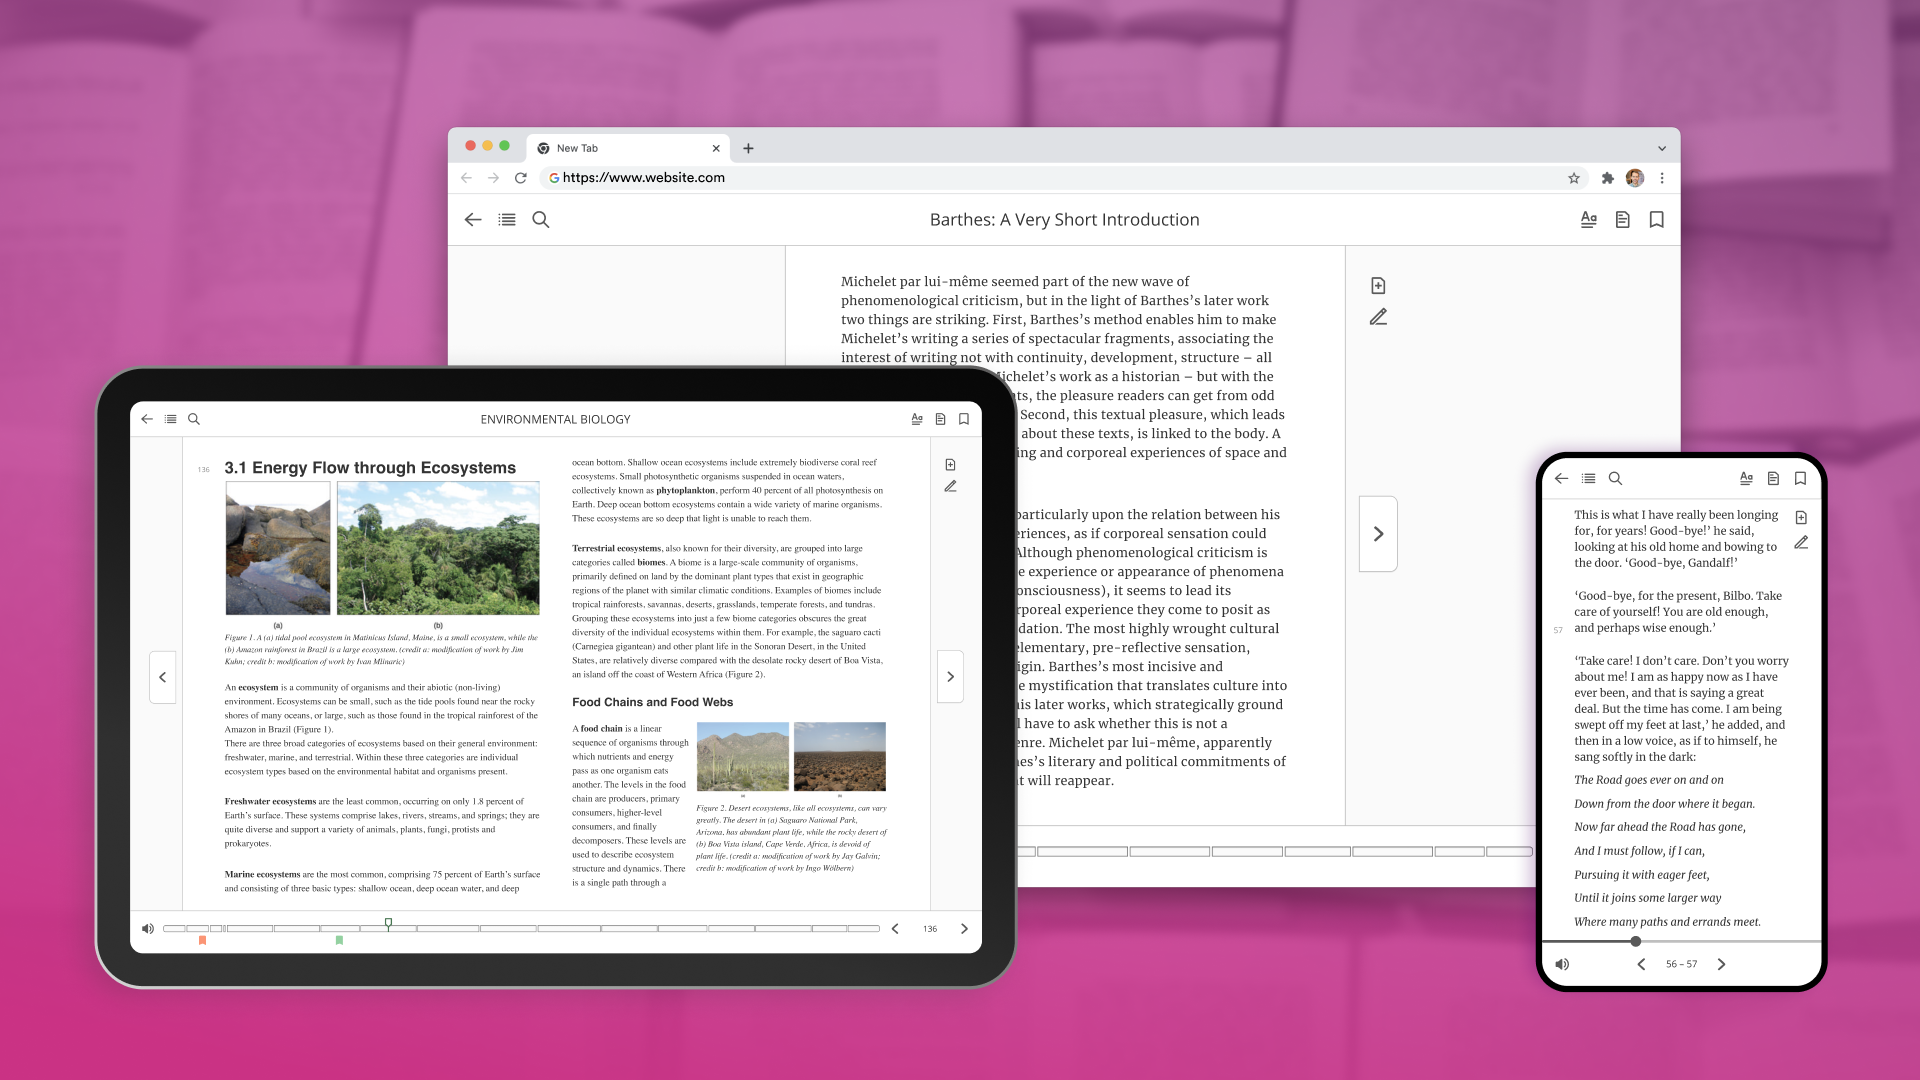 From left to right: A tablet, a Google Chrome's desktop browser, and a phone display textbooks presented within Flowpub, an E-reading interface. Out of focus books fade into a bright pink gradient in the background.